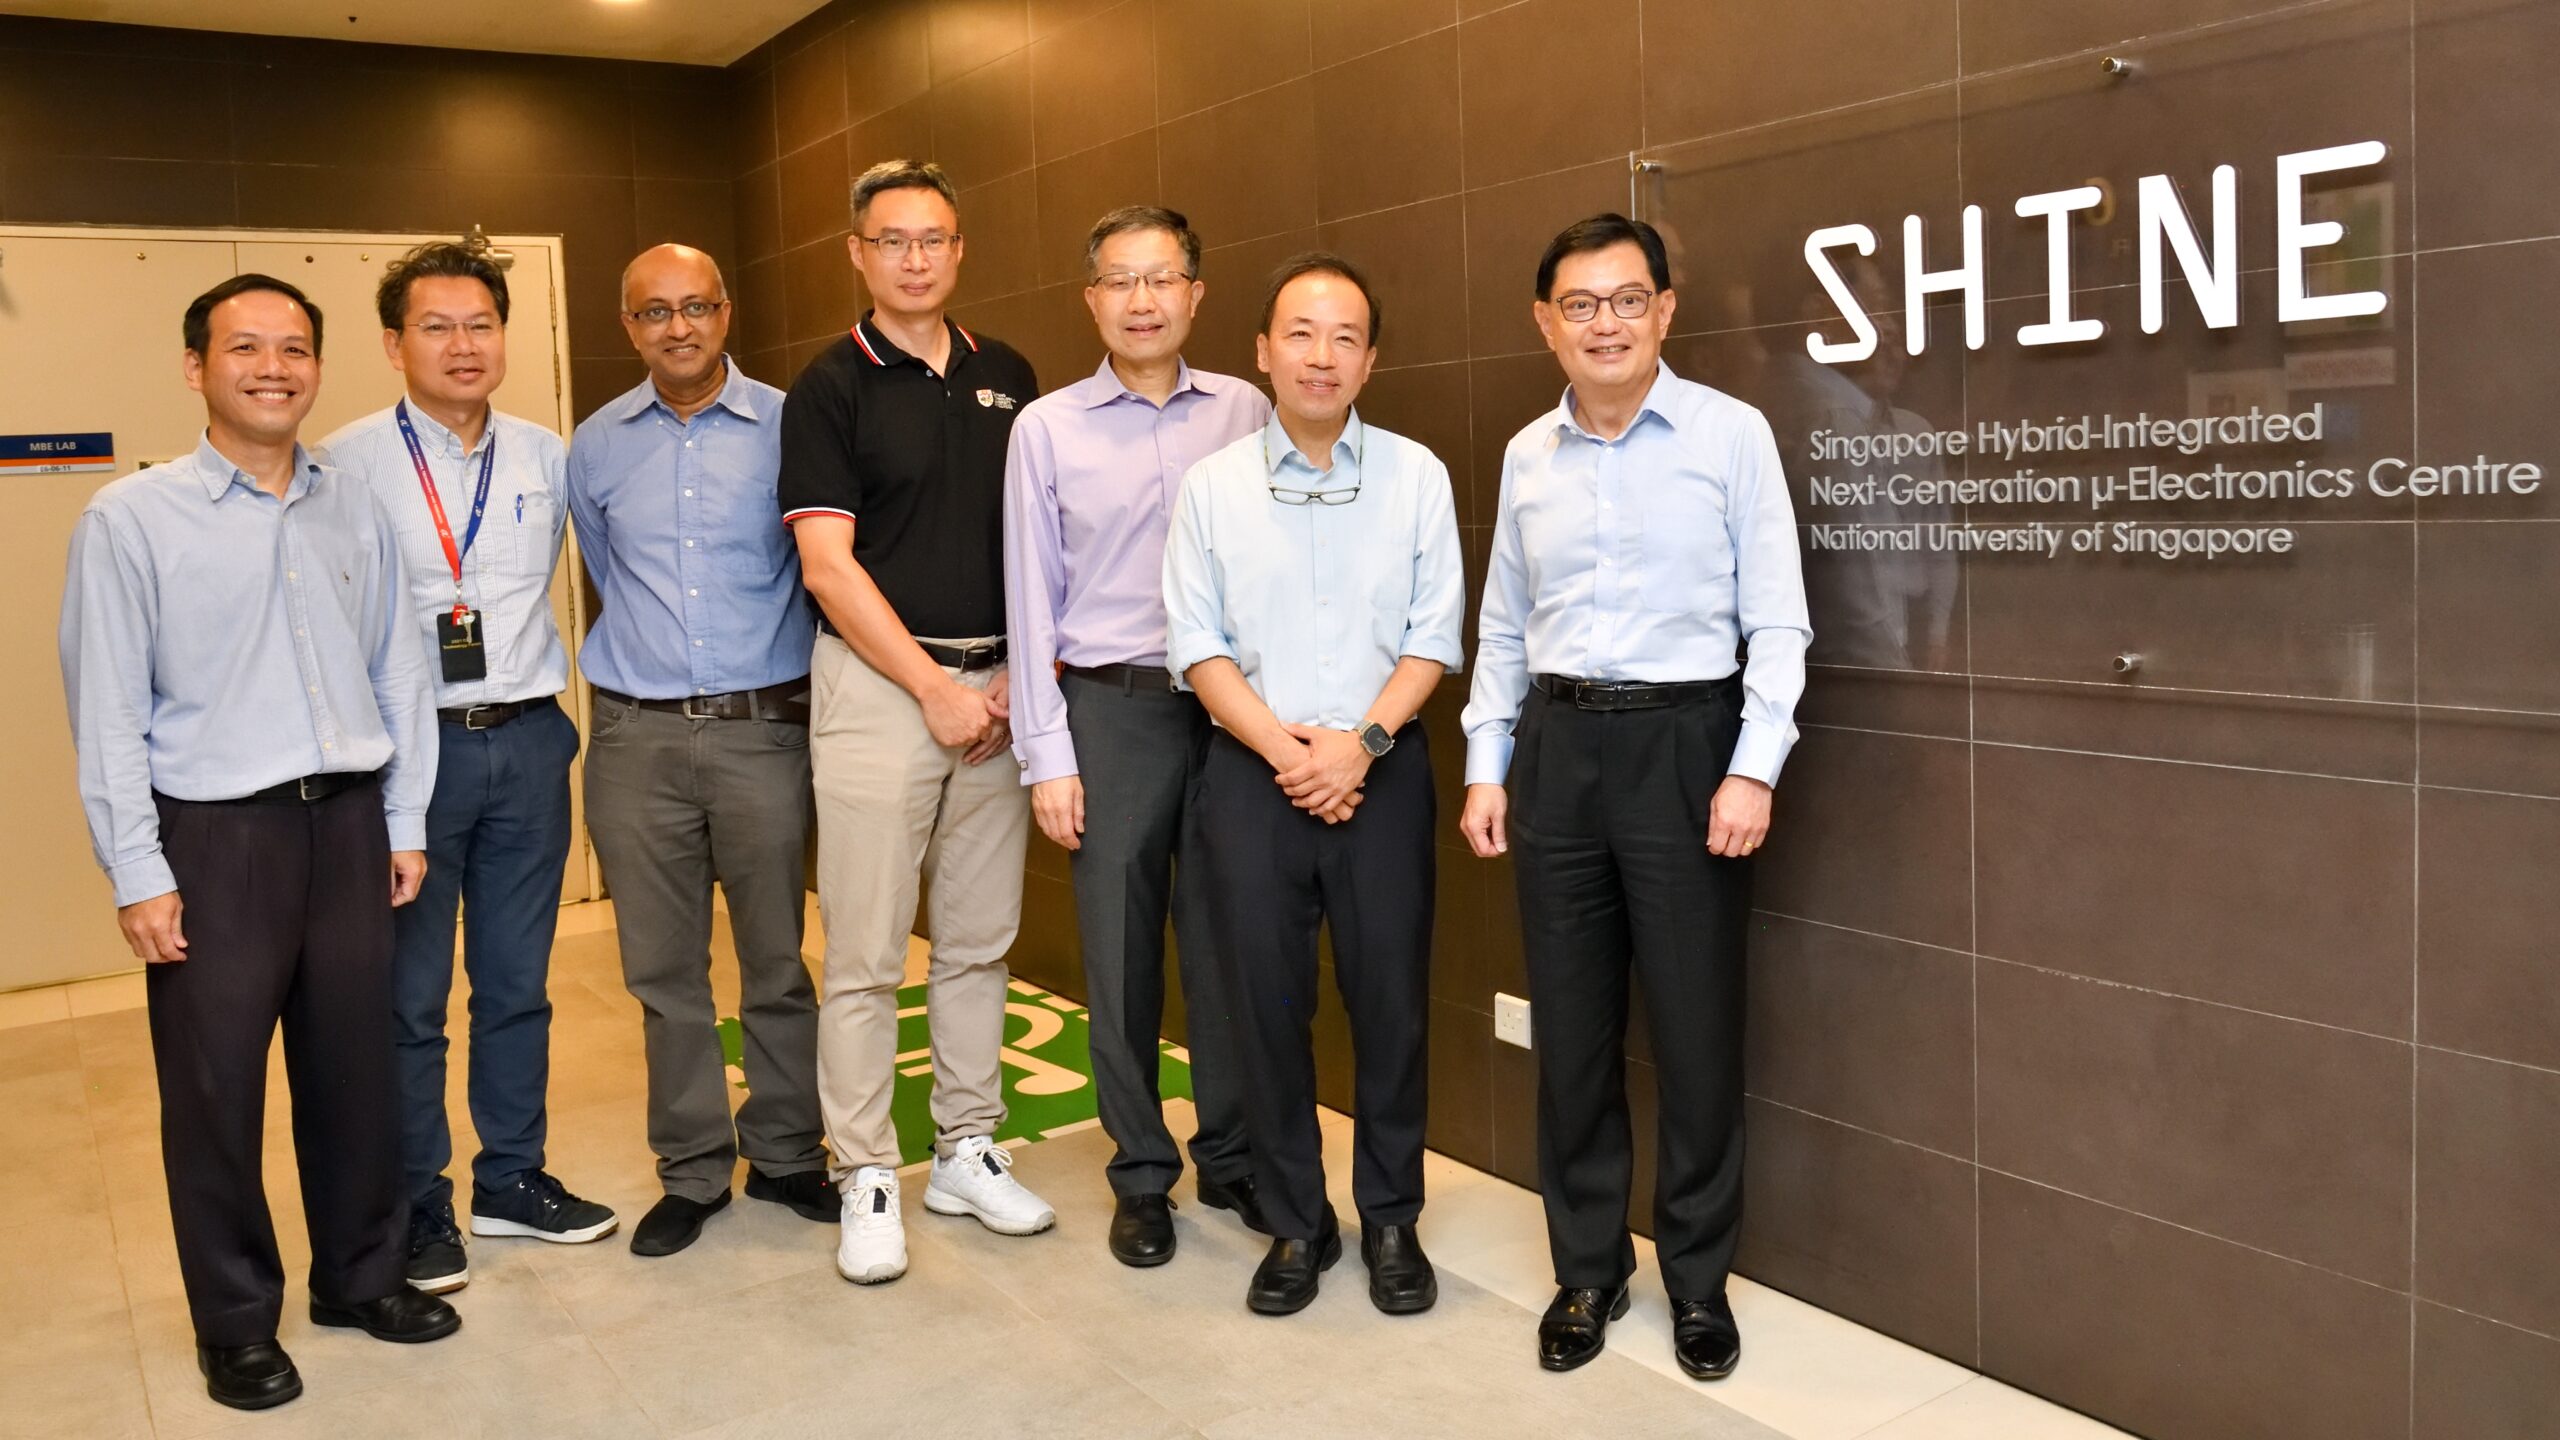 Mr Heng was introduced to members of SHINE's faculty and staff during his visit to the centre.